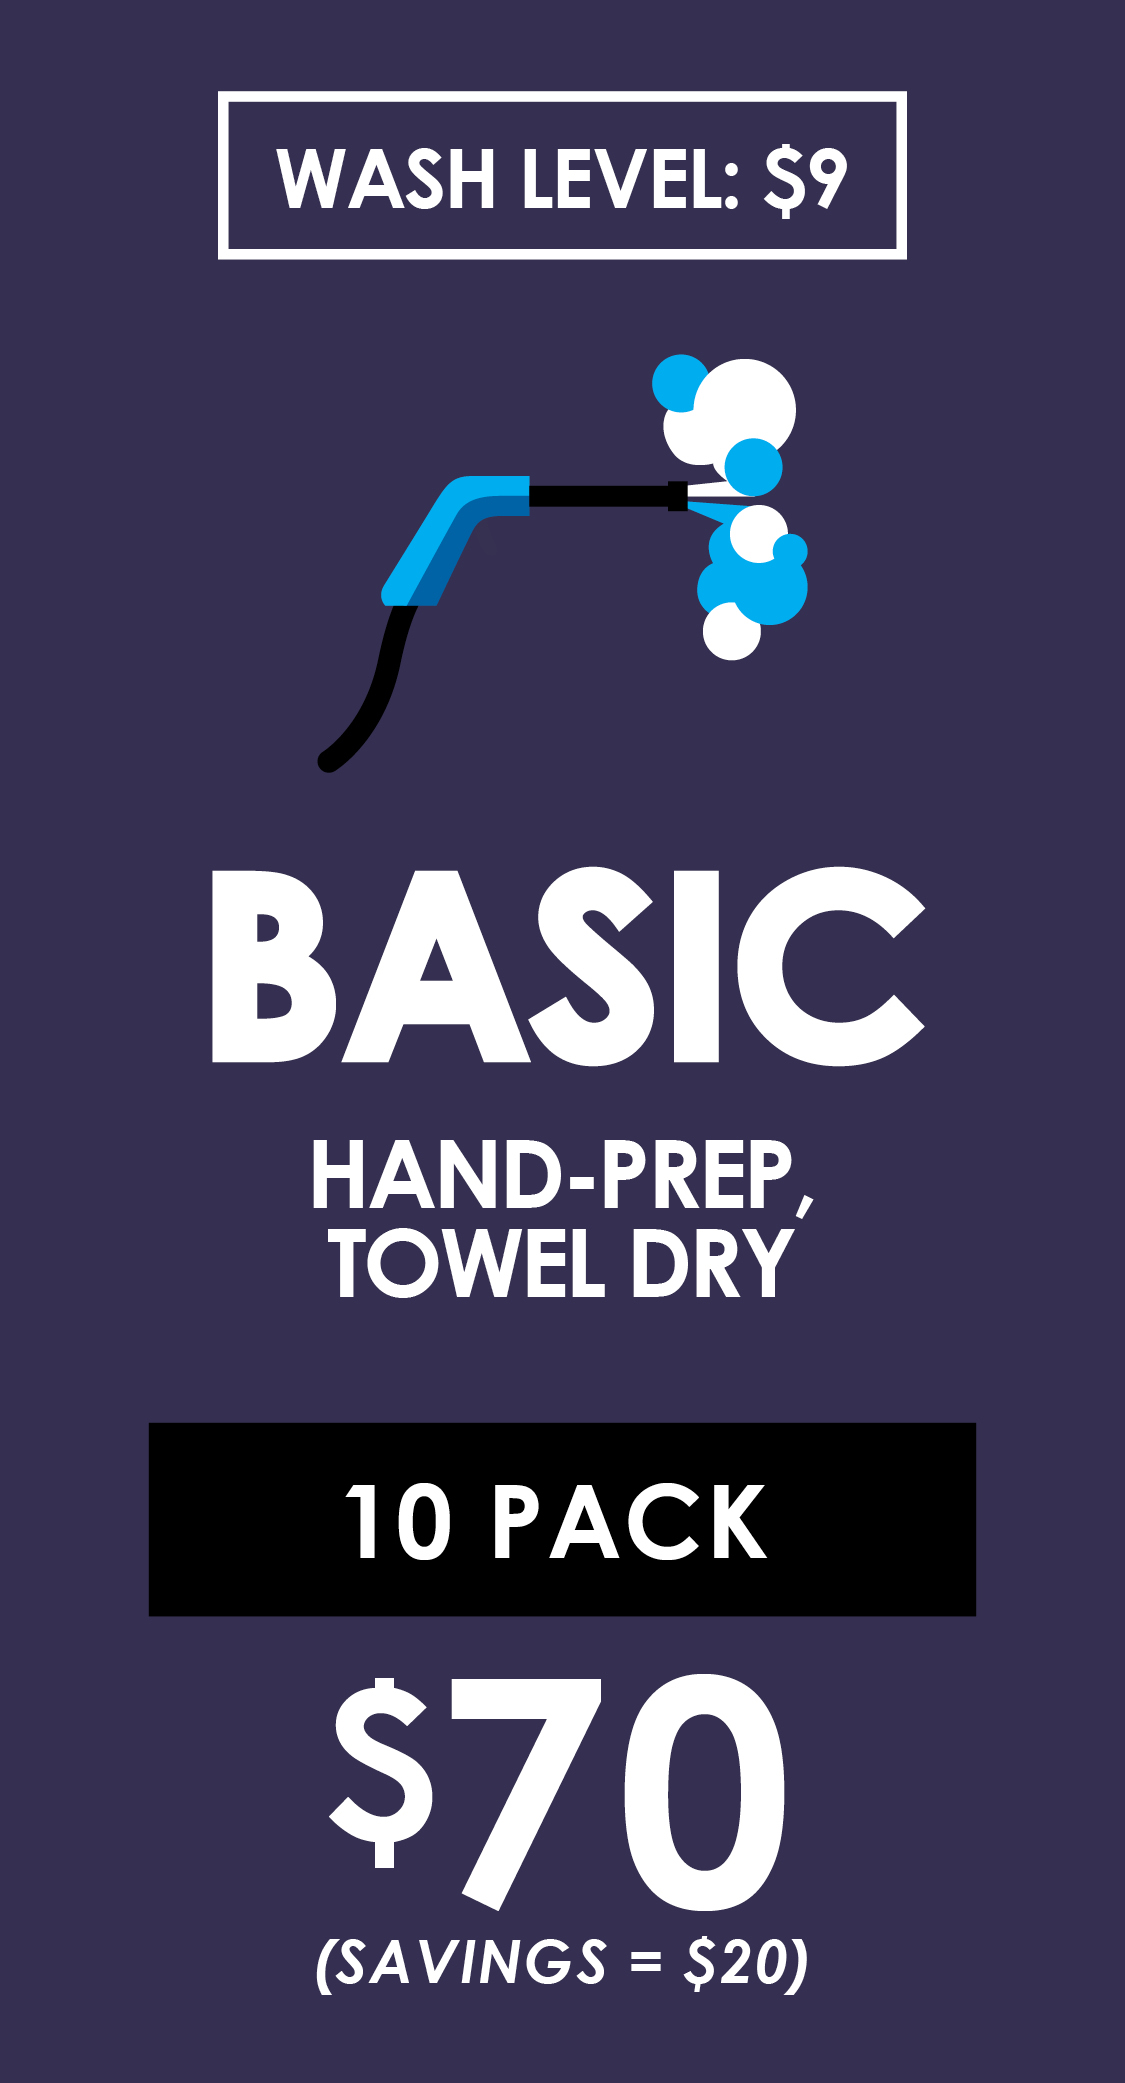 $9, Includes: Hand Prep, Hand-Dry Finish, Bug-Free Guarantee, Free Vacuums